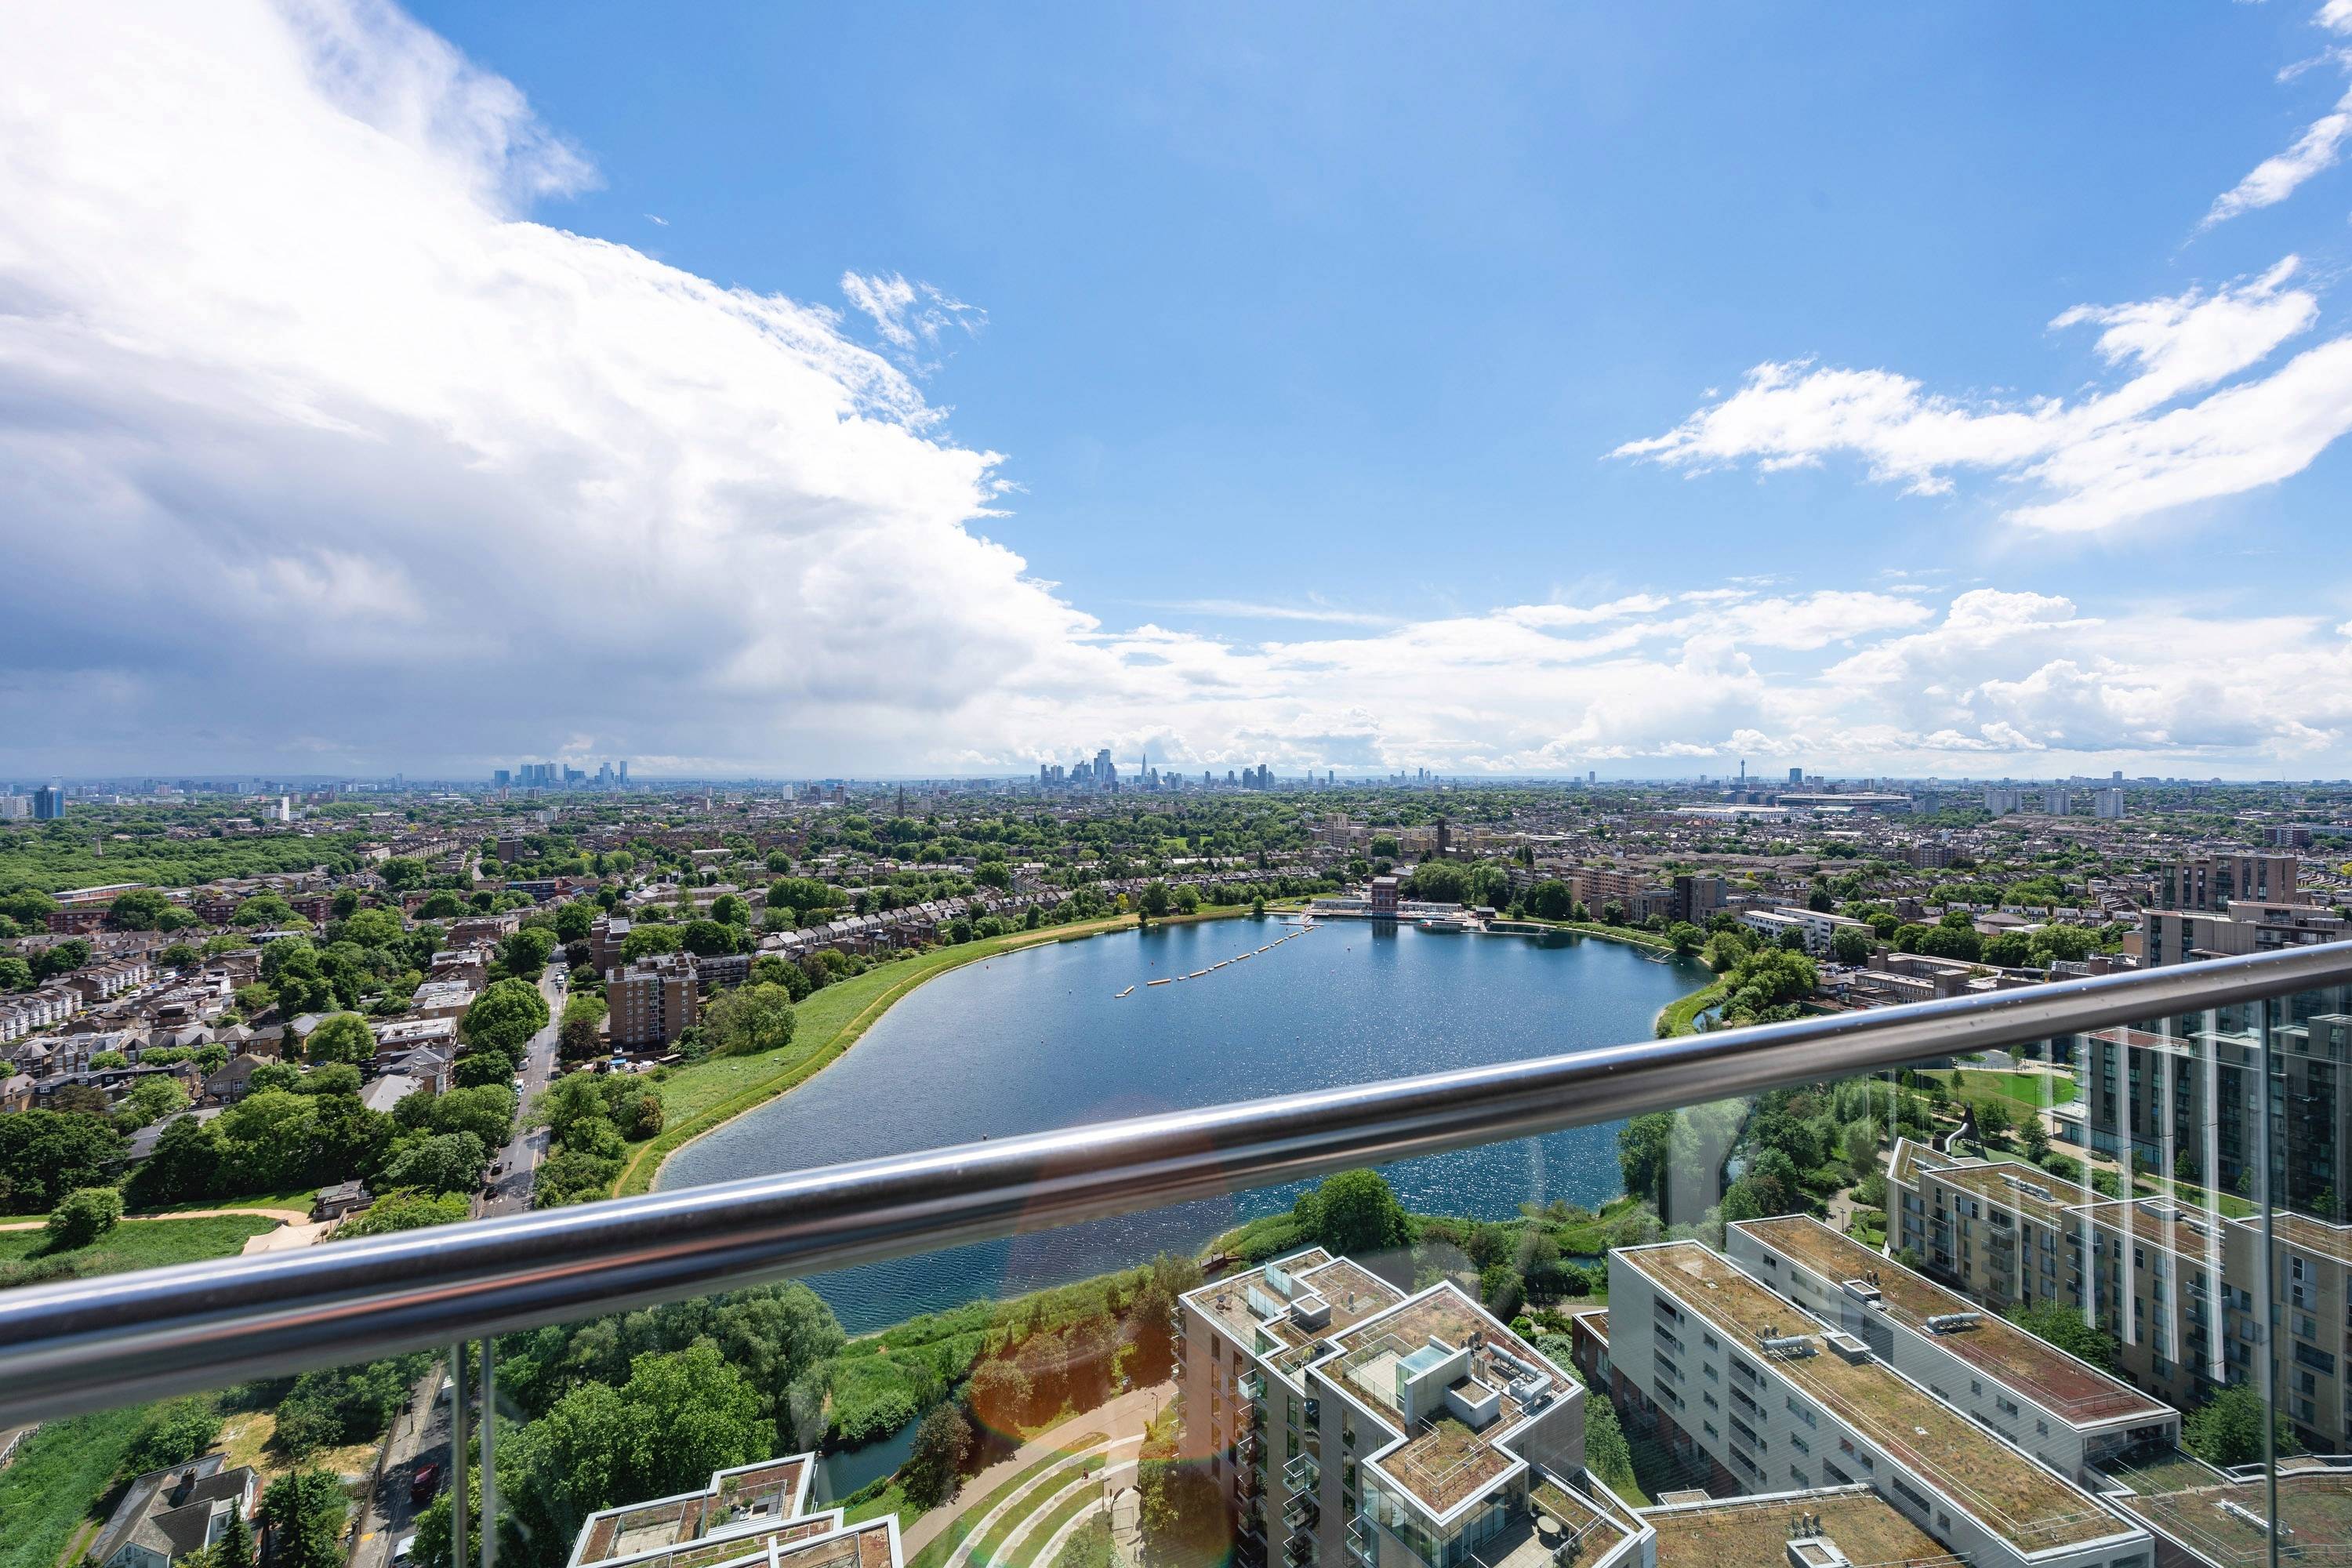 Hidden Oasis, 10 minutes from Central London -  Luxury 3-Bedroom Penthouse in a Stunning New Development Surrounded by Nature - Eighteenth Floor - Reservoirs and Park Views